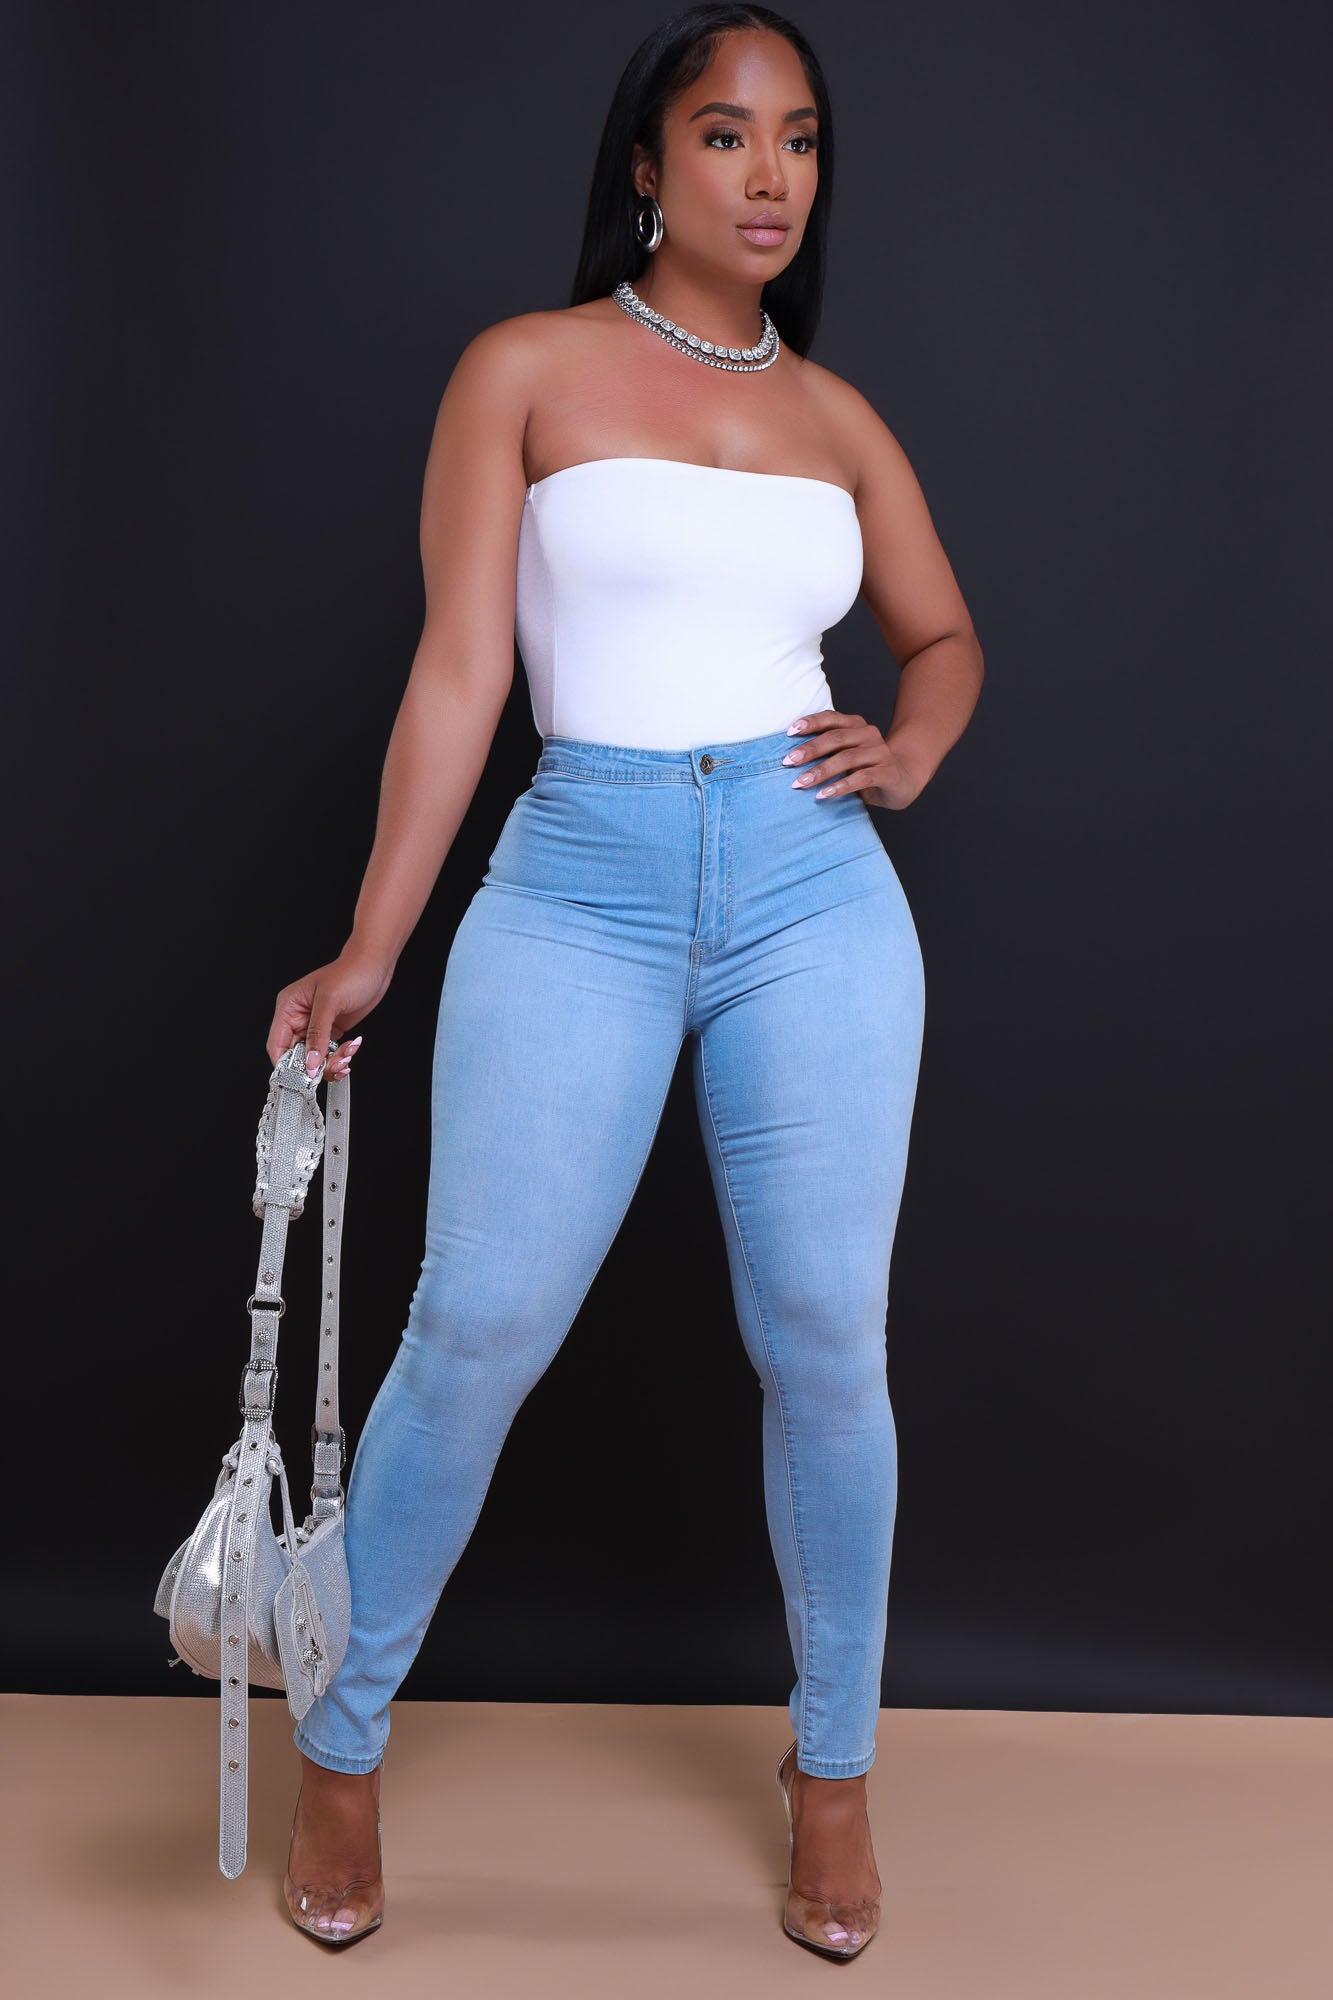 Fashion Nova Is Selling Cover-up Pants That Don't Cover Your Butt